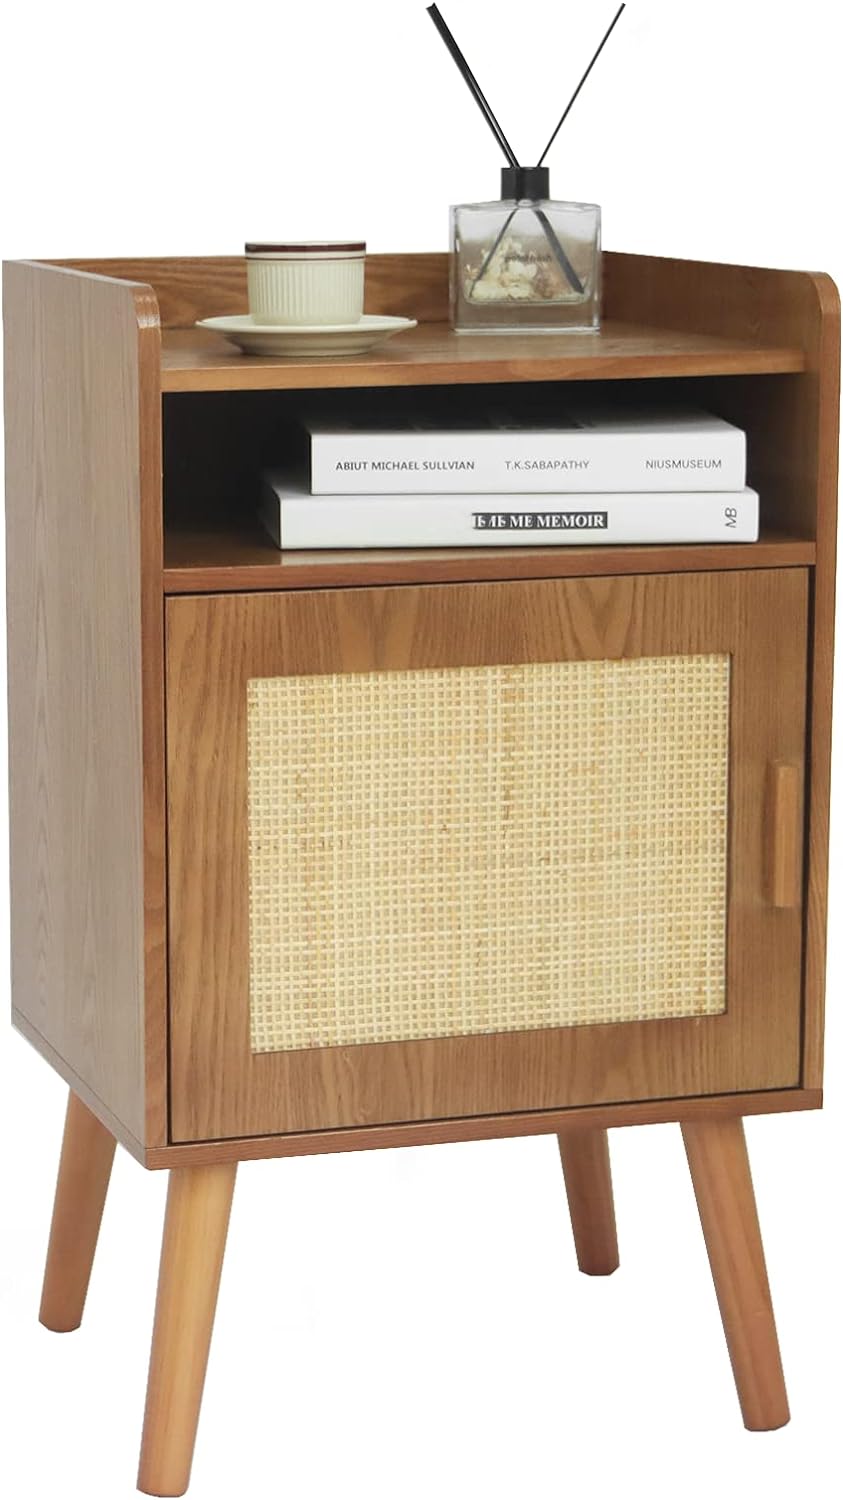 AWASEN Mid Century Modern Nightstand, Rattan Nightstand with 2-Tier Shelf and Door, Bedside Table with Storage for Small Spaces, Bedroom,Living Room, Easy Assembly, Brown Walnut